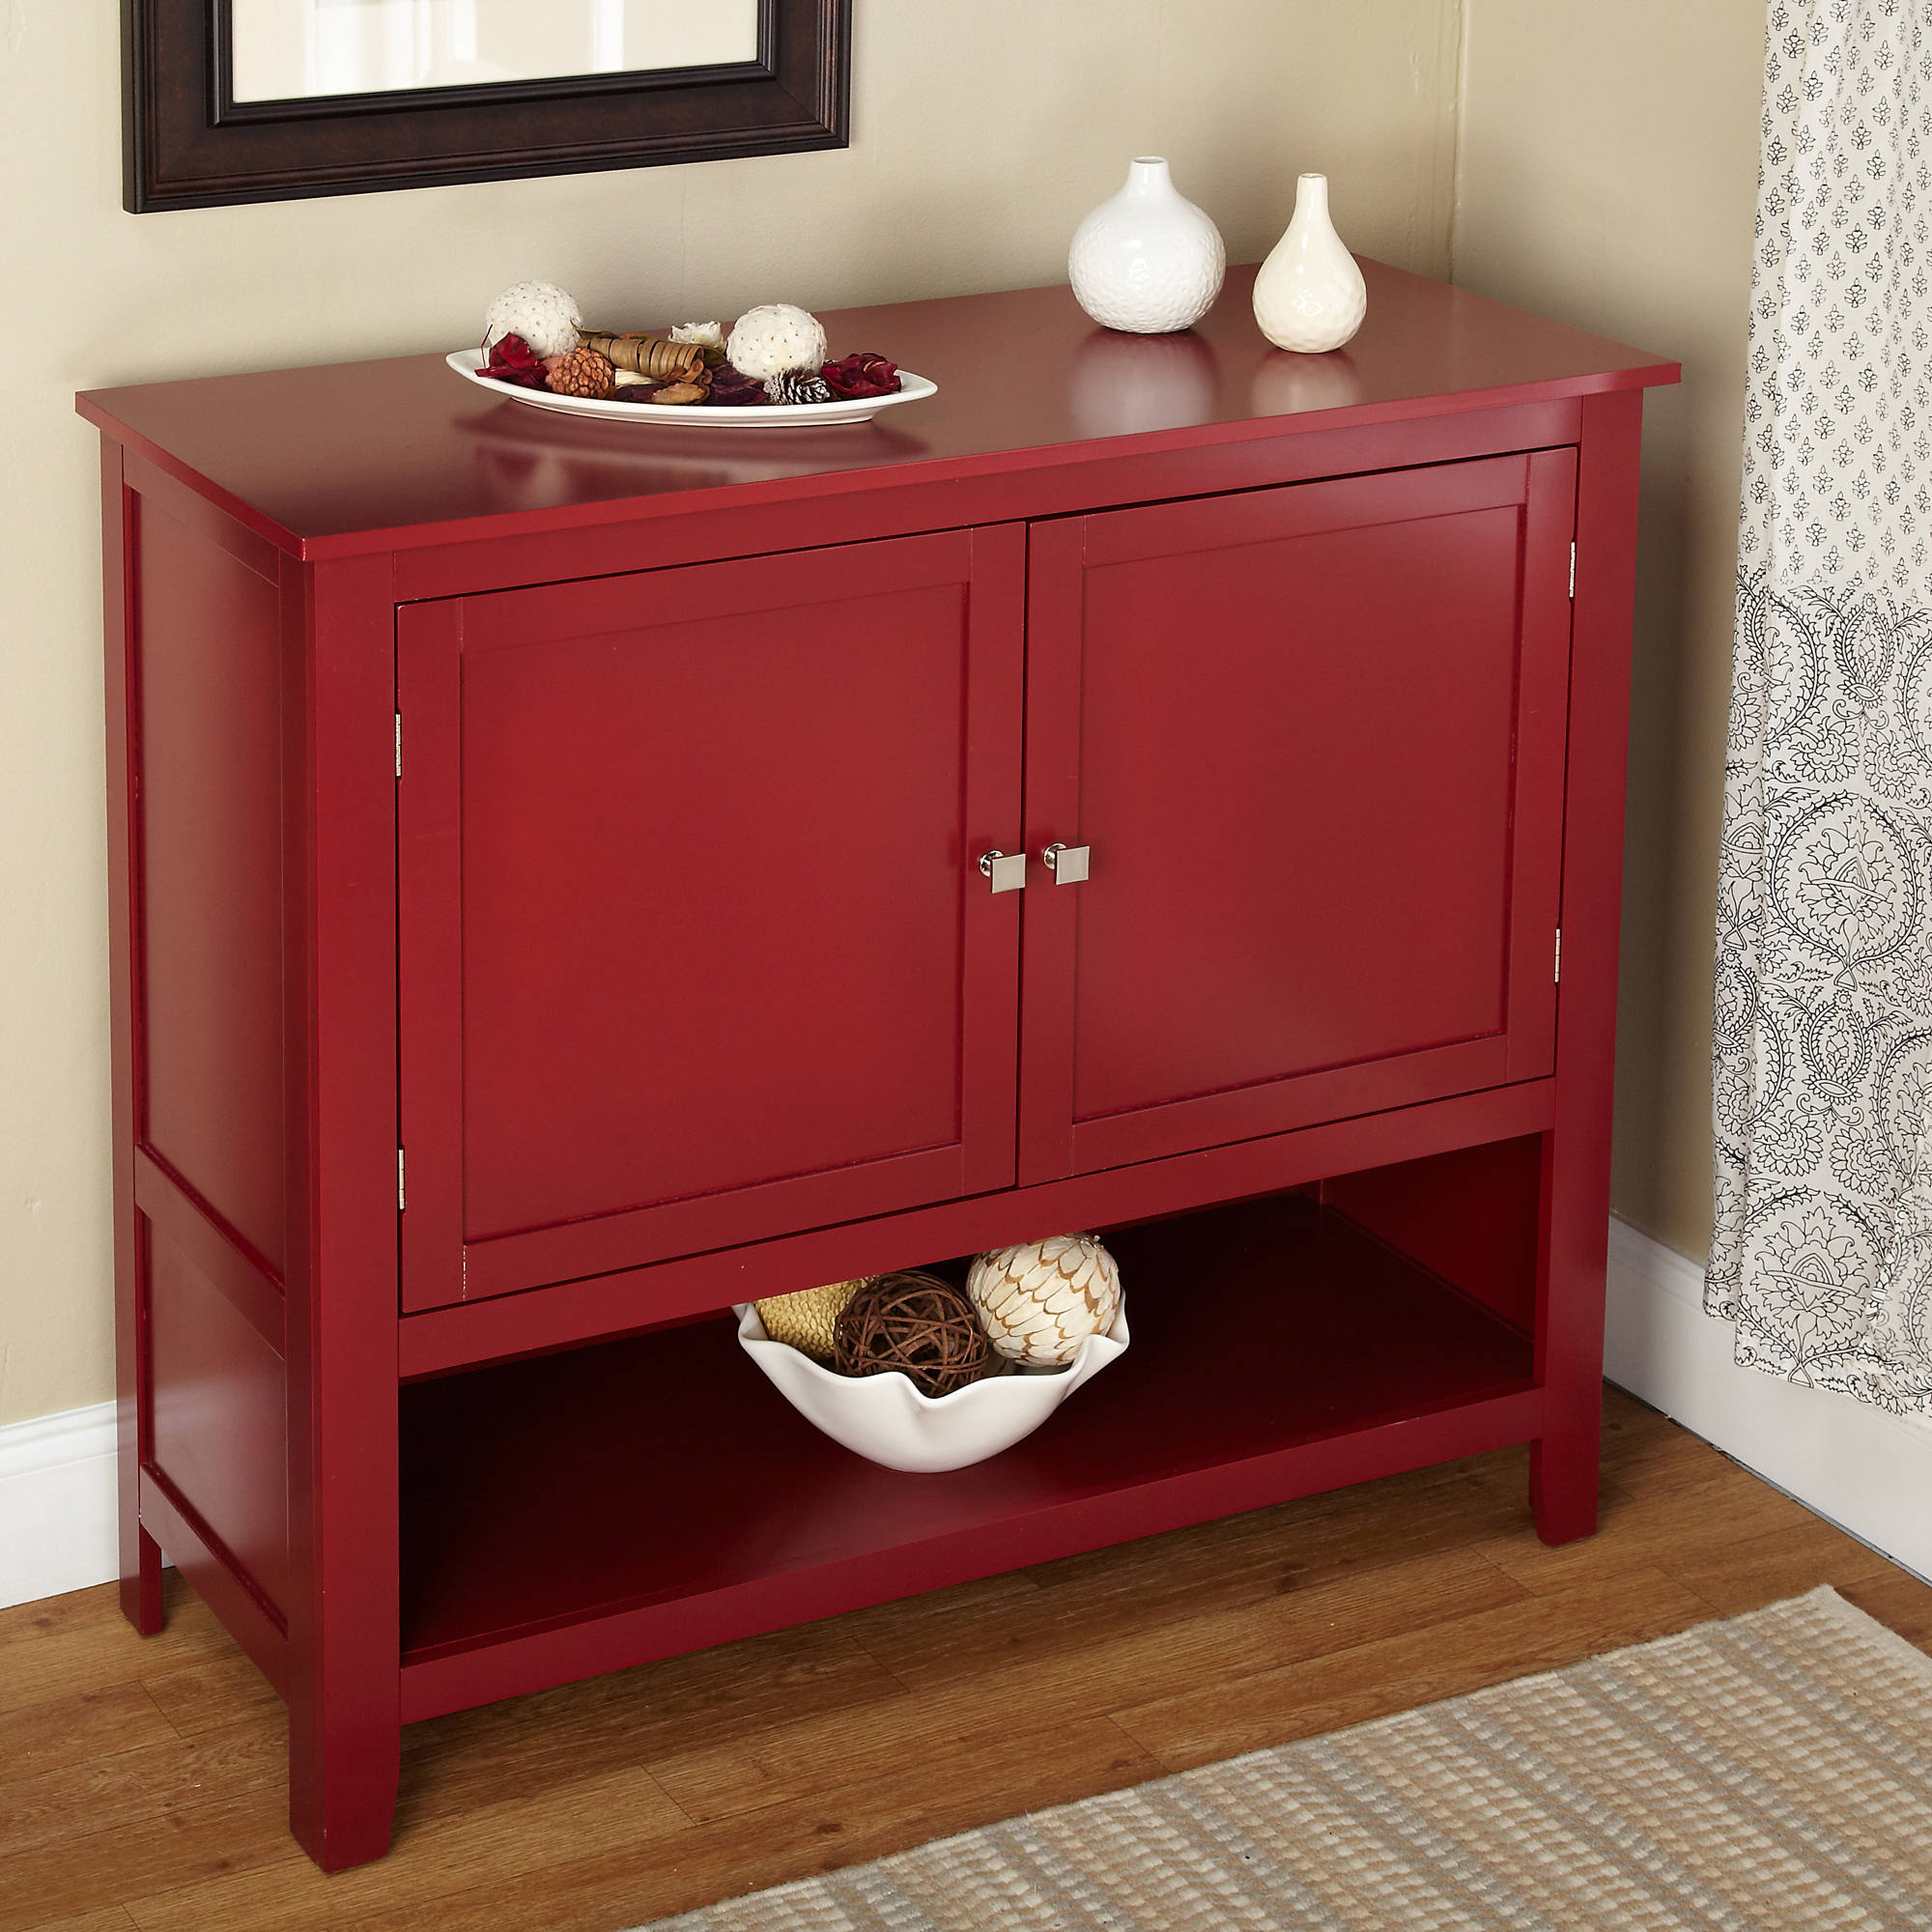 Montego Buffet, Multiple Colors - image 1 of 3